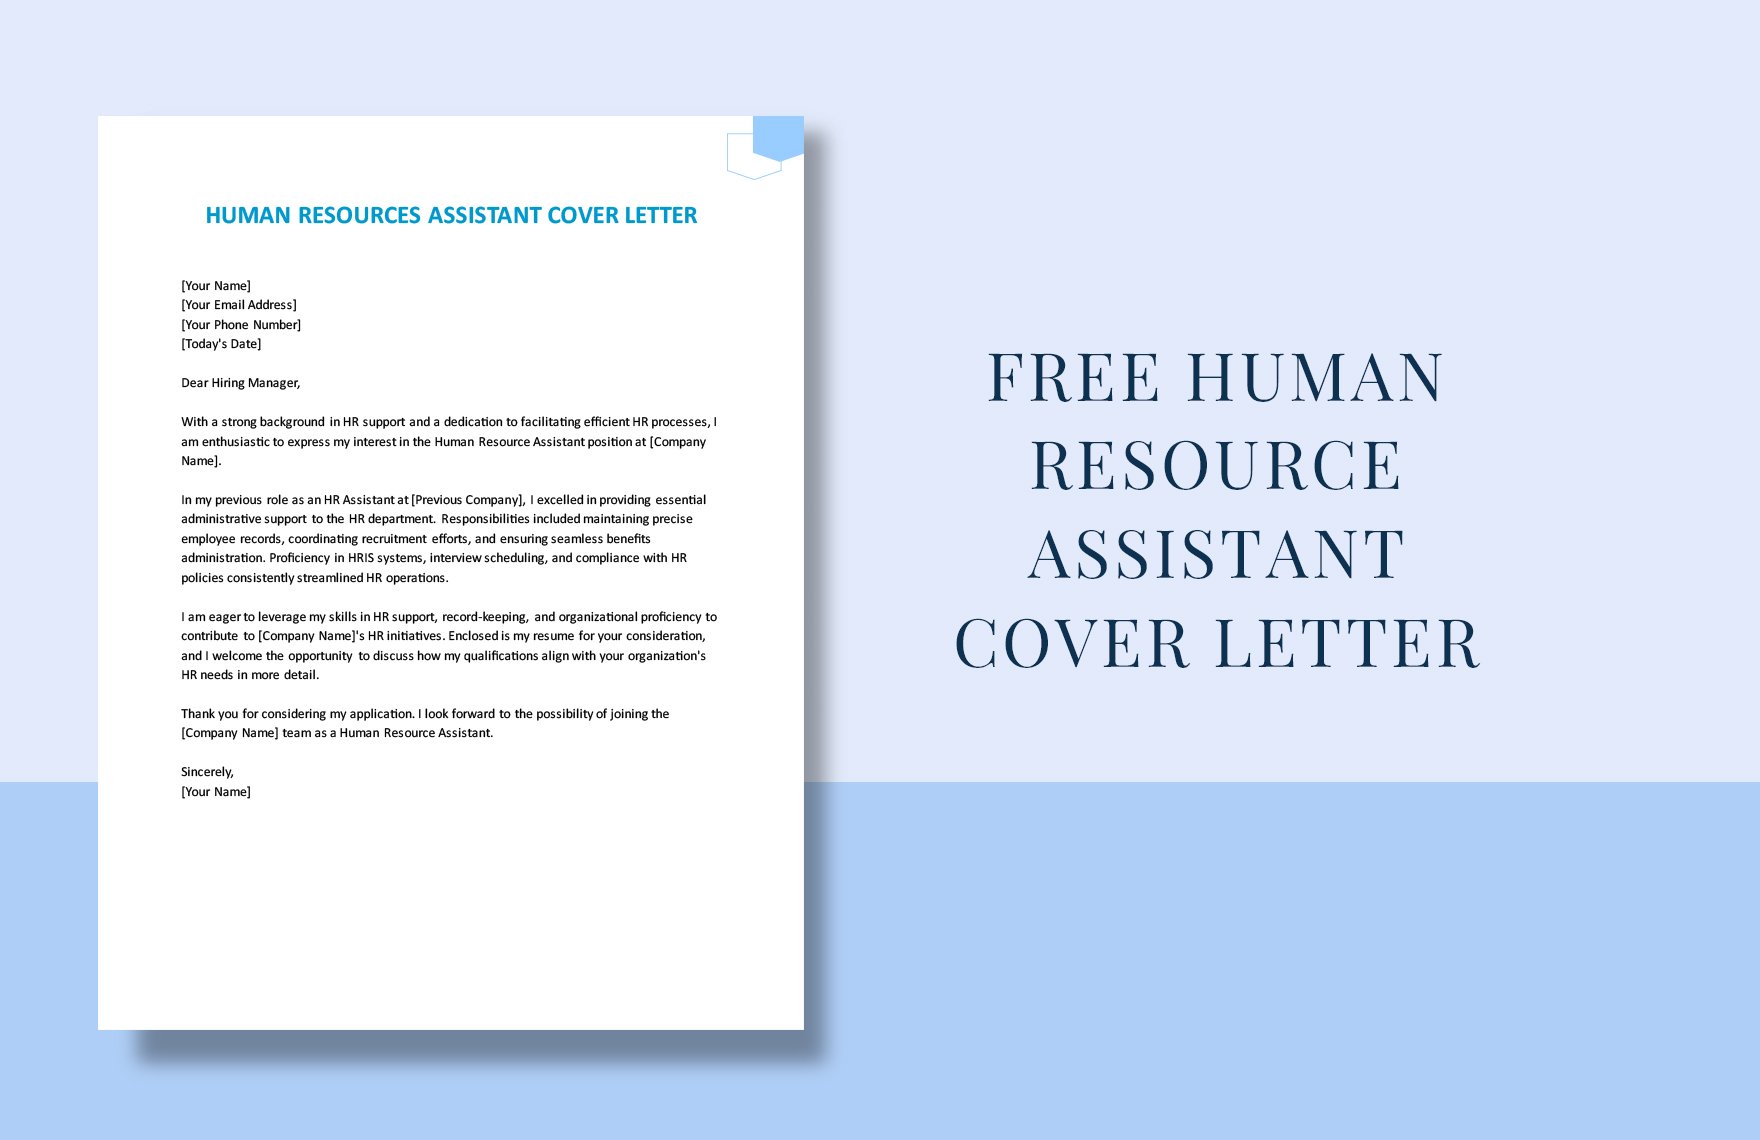 Human Resource Assistant Cover Letter